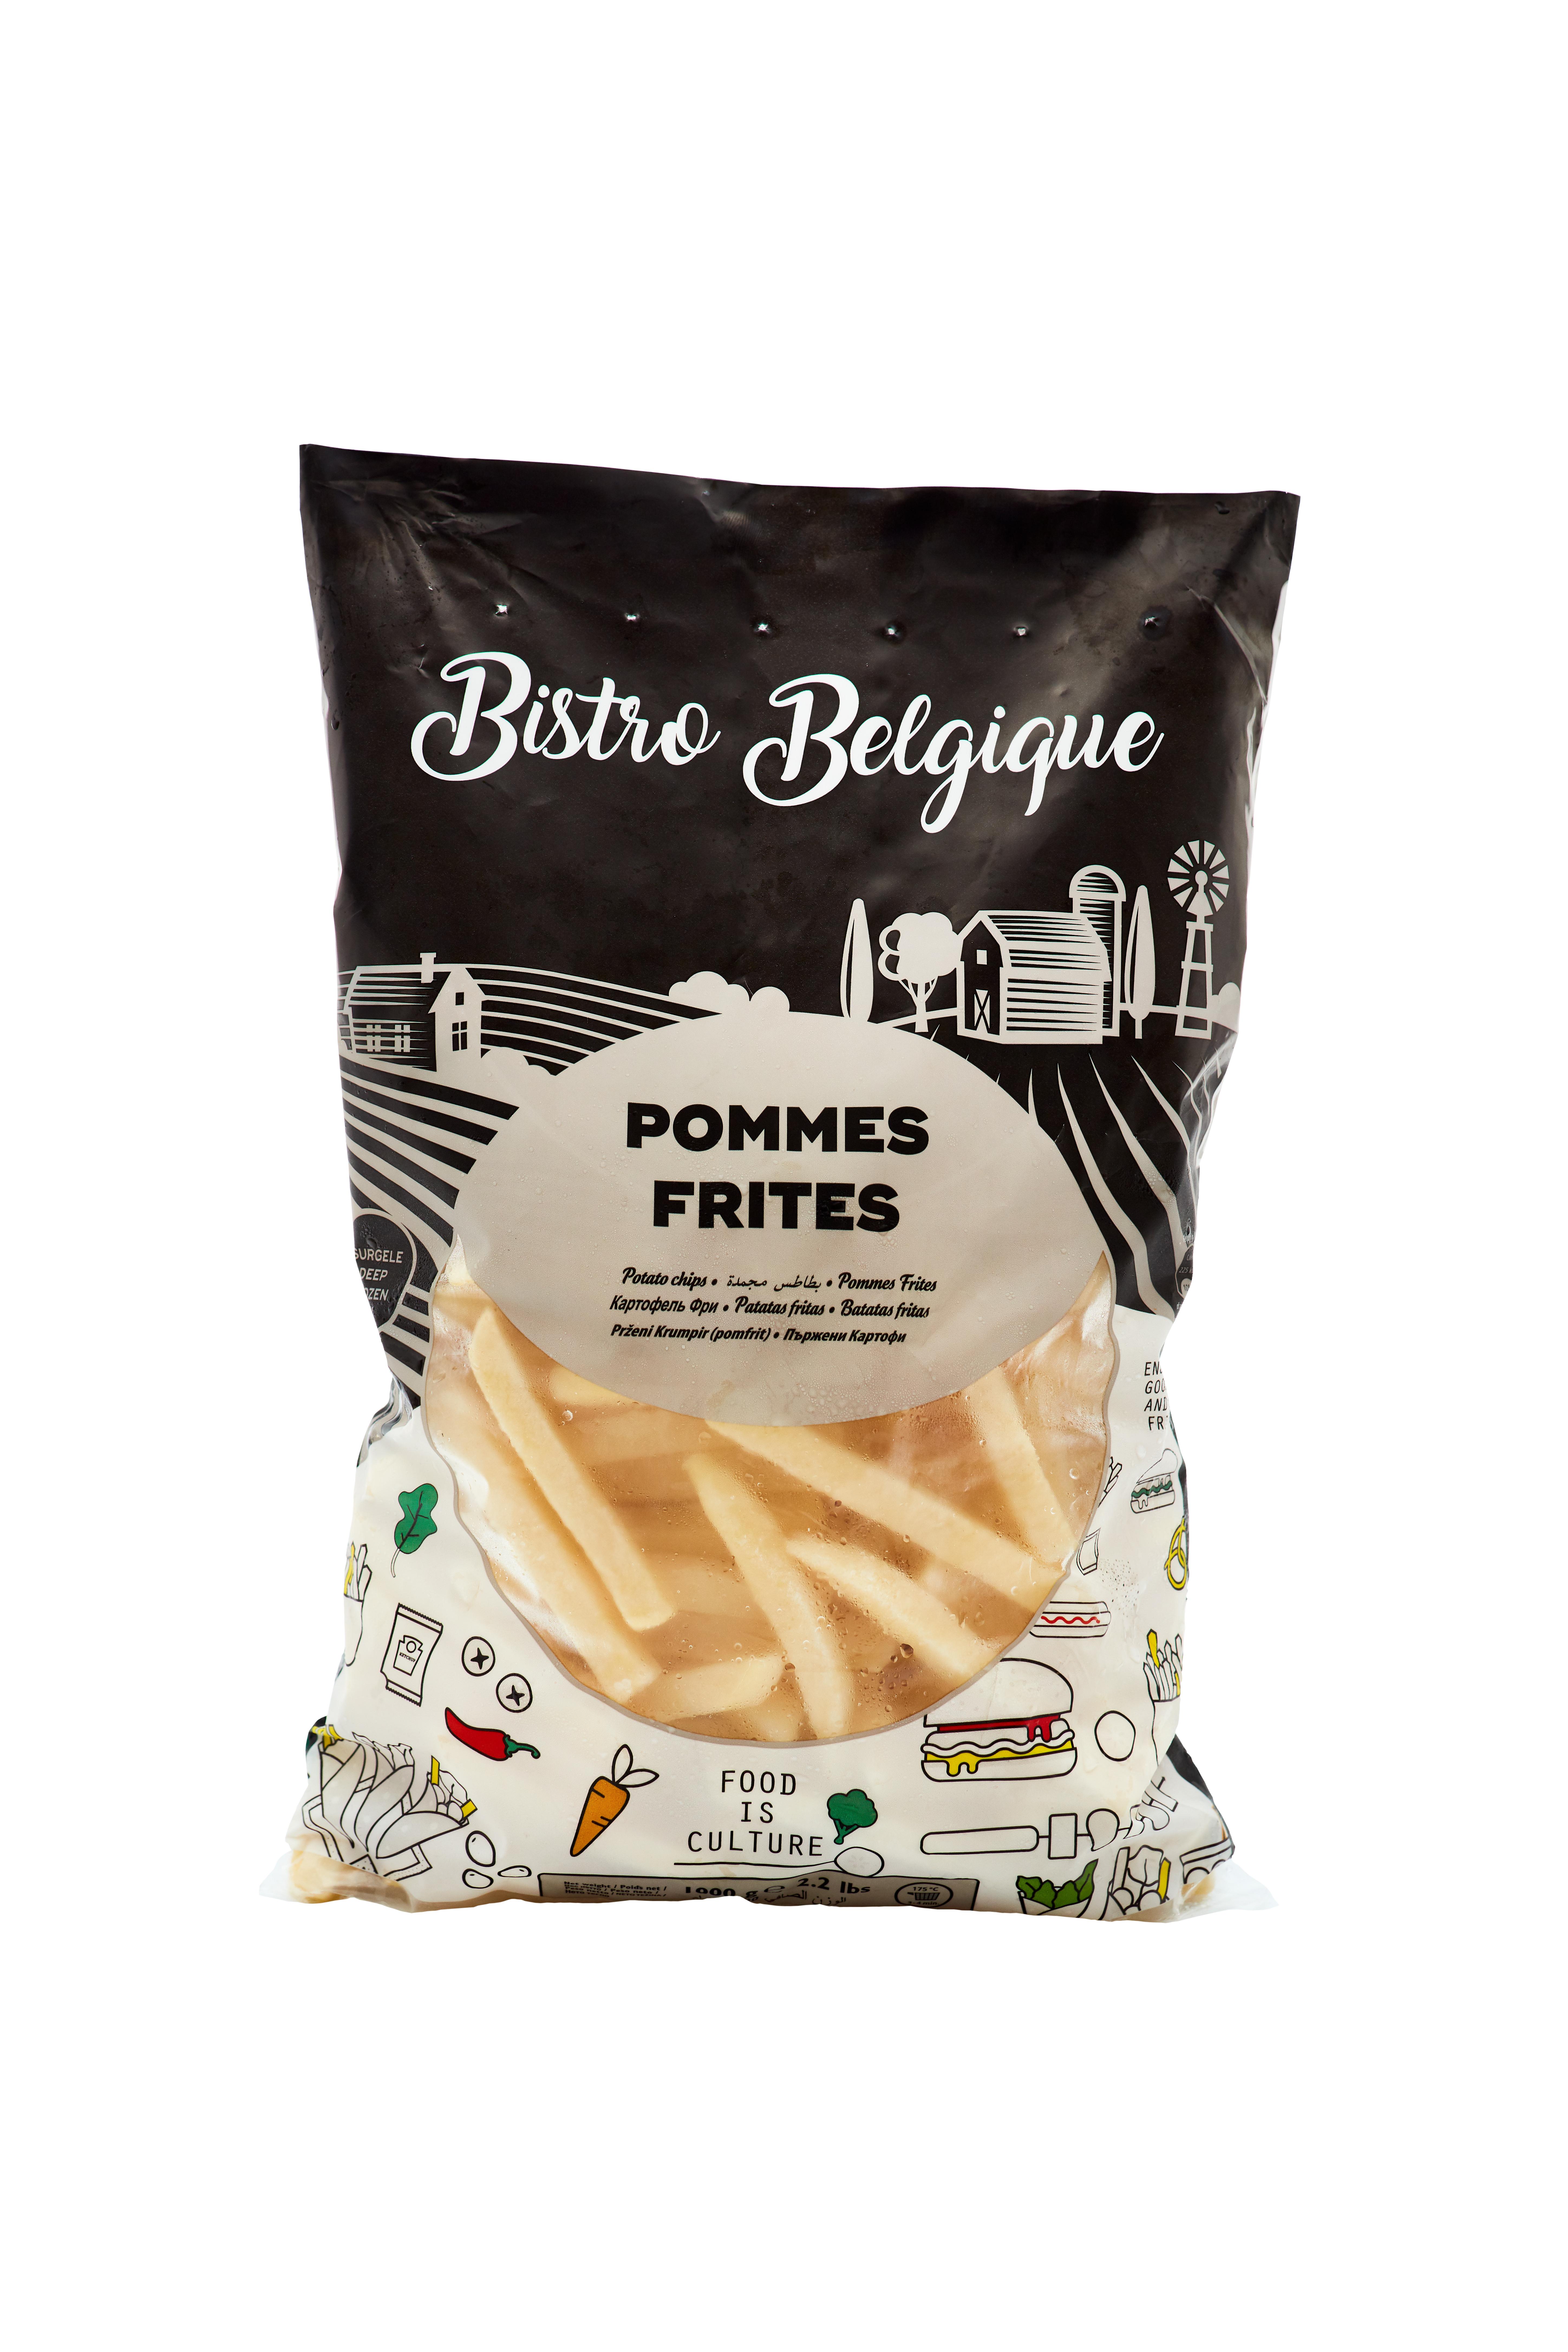 French fries 9x9mm packaging Bistro Belgique brand